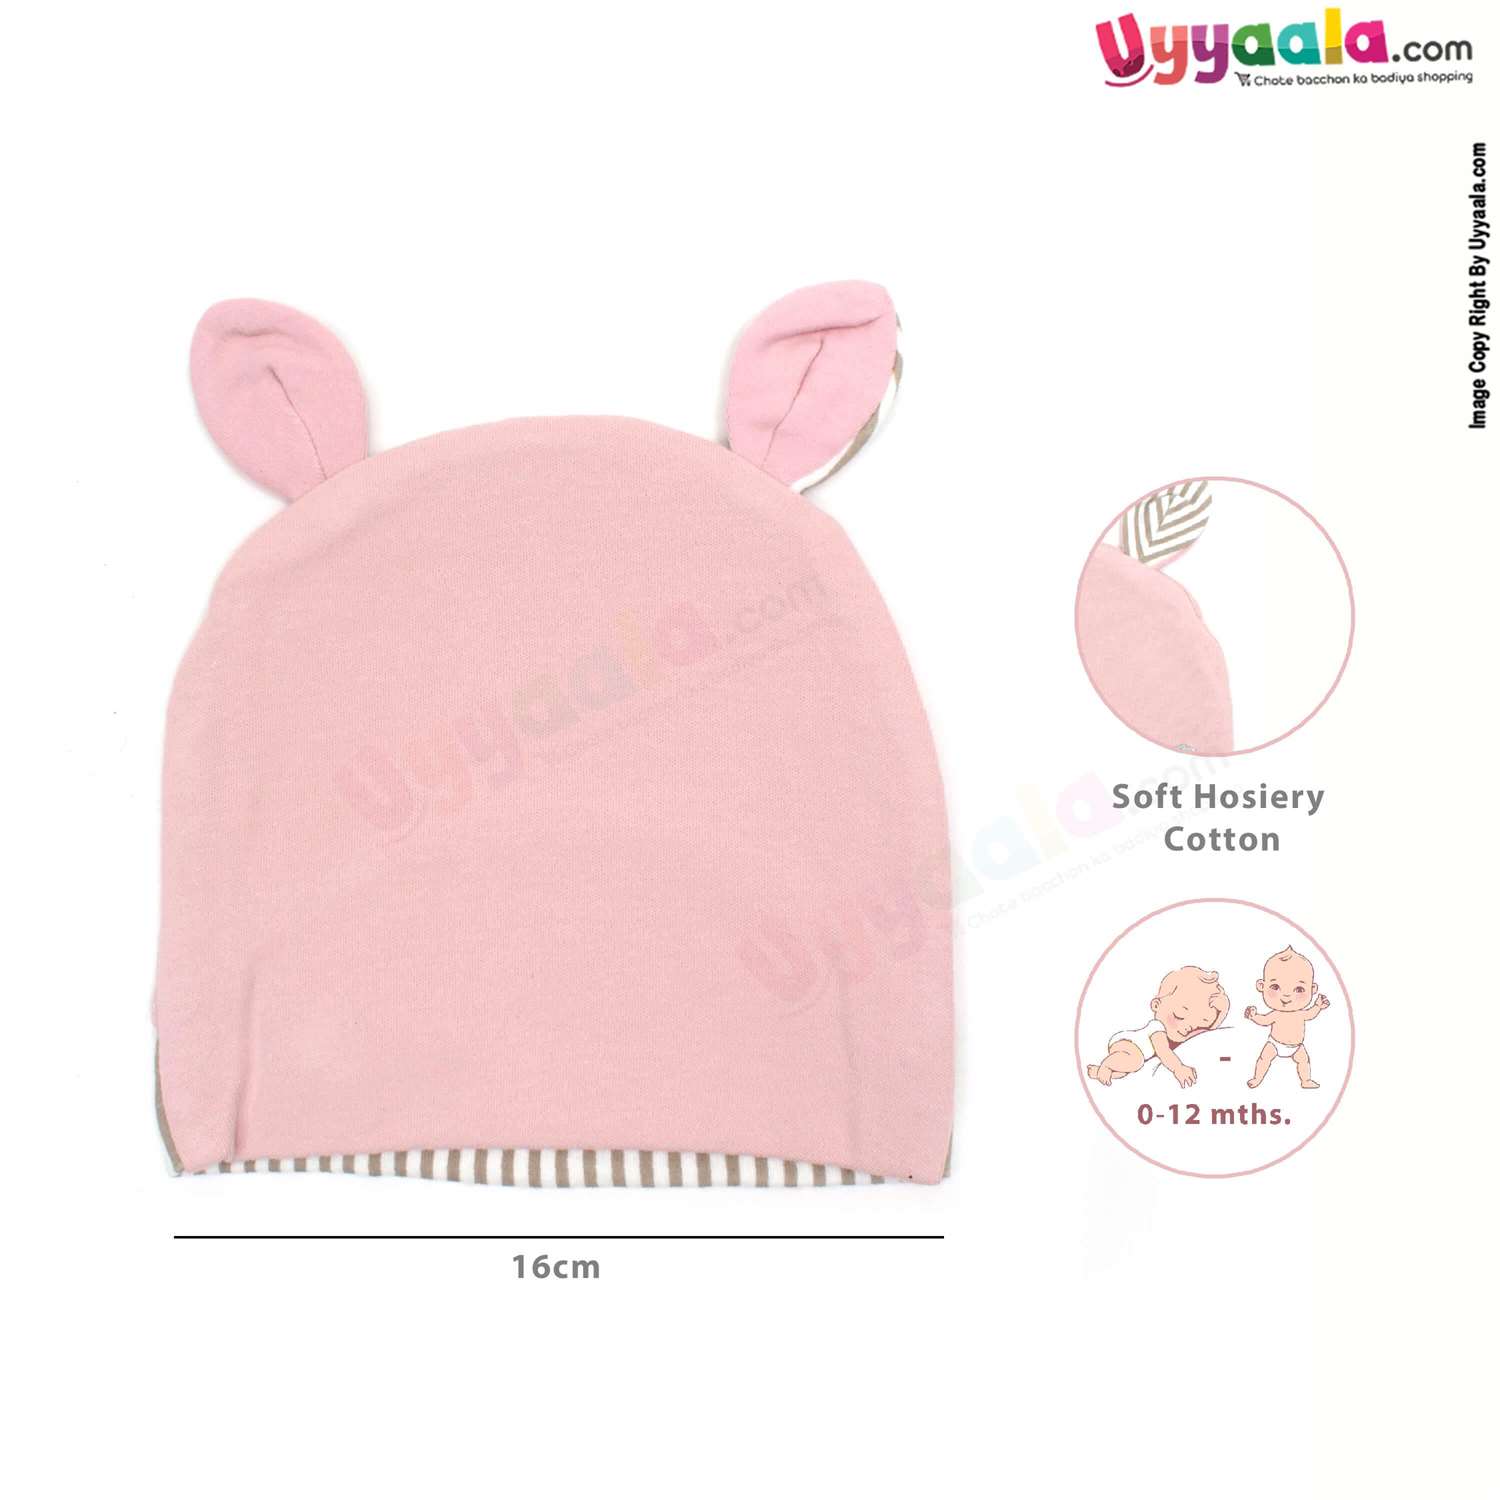 Fancy Round Cap for Babies with Stretchable Soft Hosiery Material, Bee Patch,0-12m Age - Peach